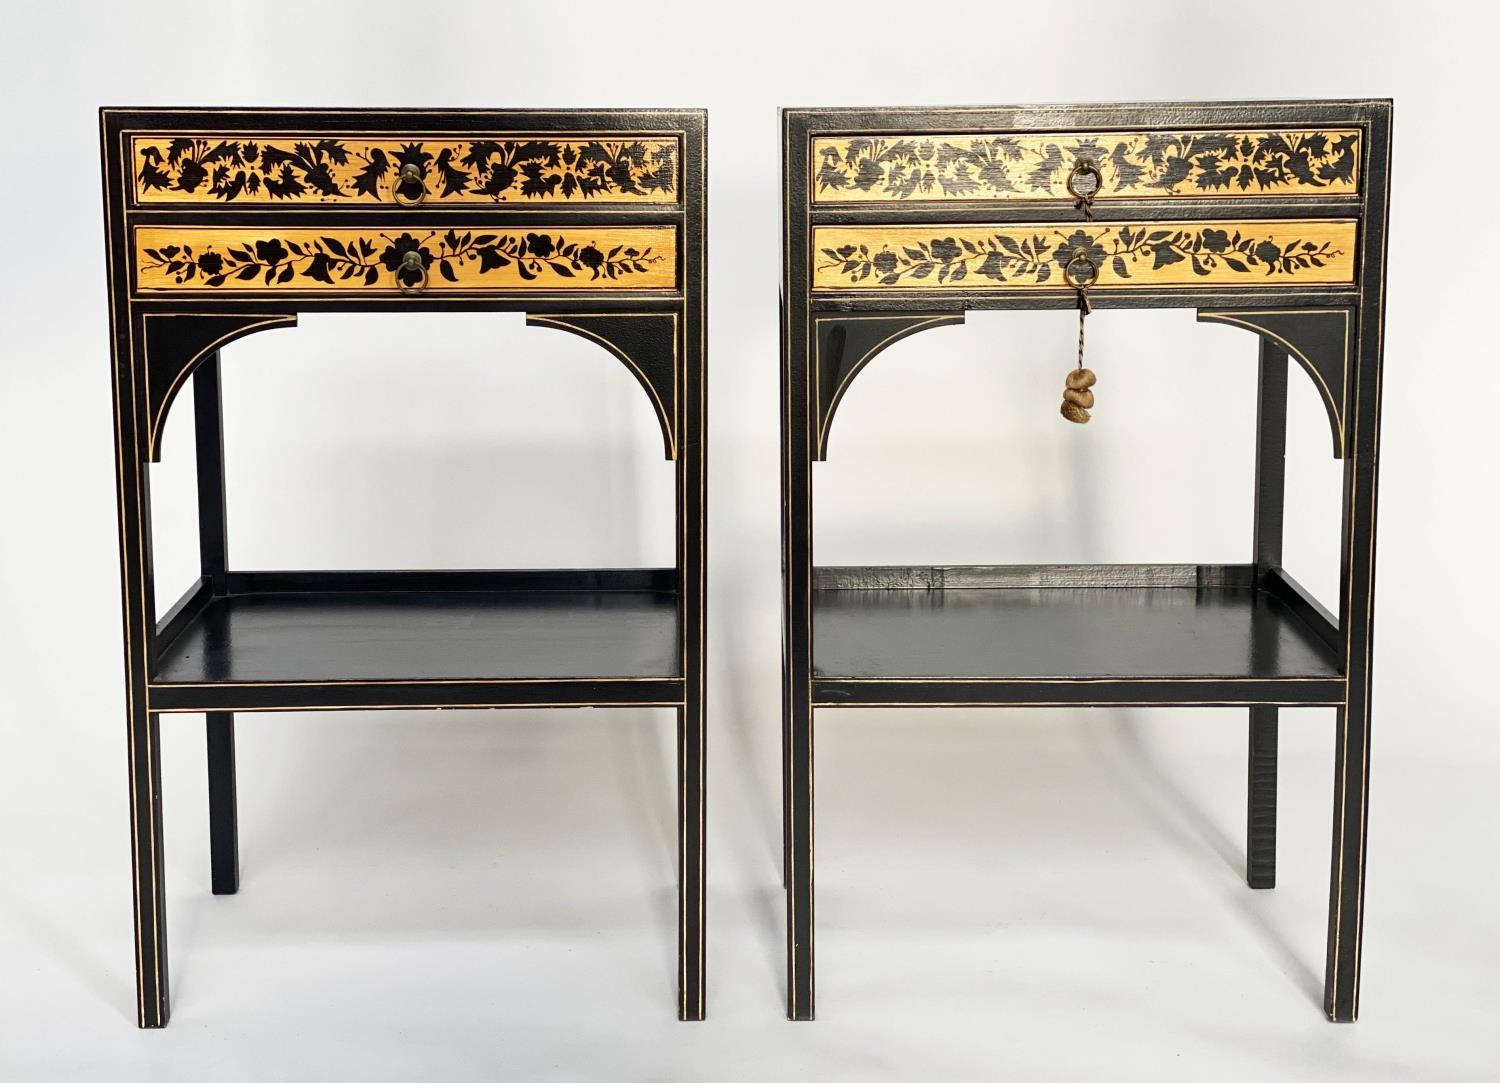 SIDE TABLES, a pair, Regency style satinwood black lacquered and line painted each with two drawers, - Image 4 of 6